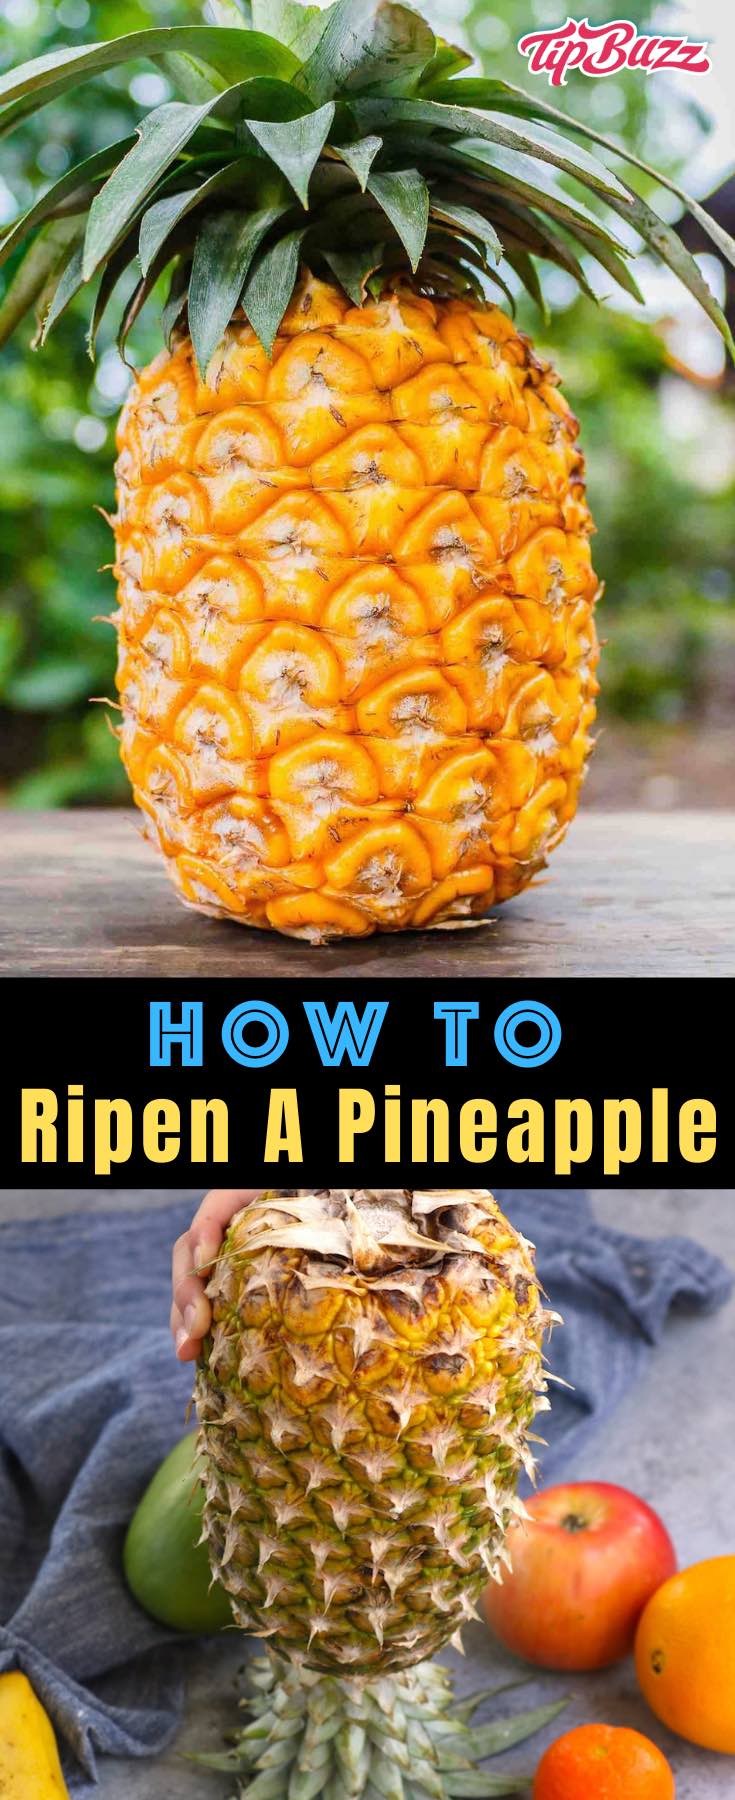 How to Ripen a Pineapple - learn all the tips and tricks to get a ripe pineapple faster! #pineapple